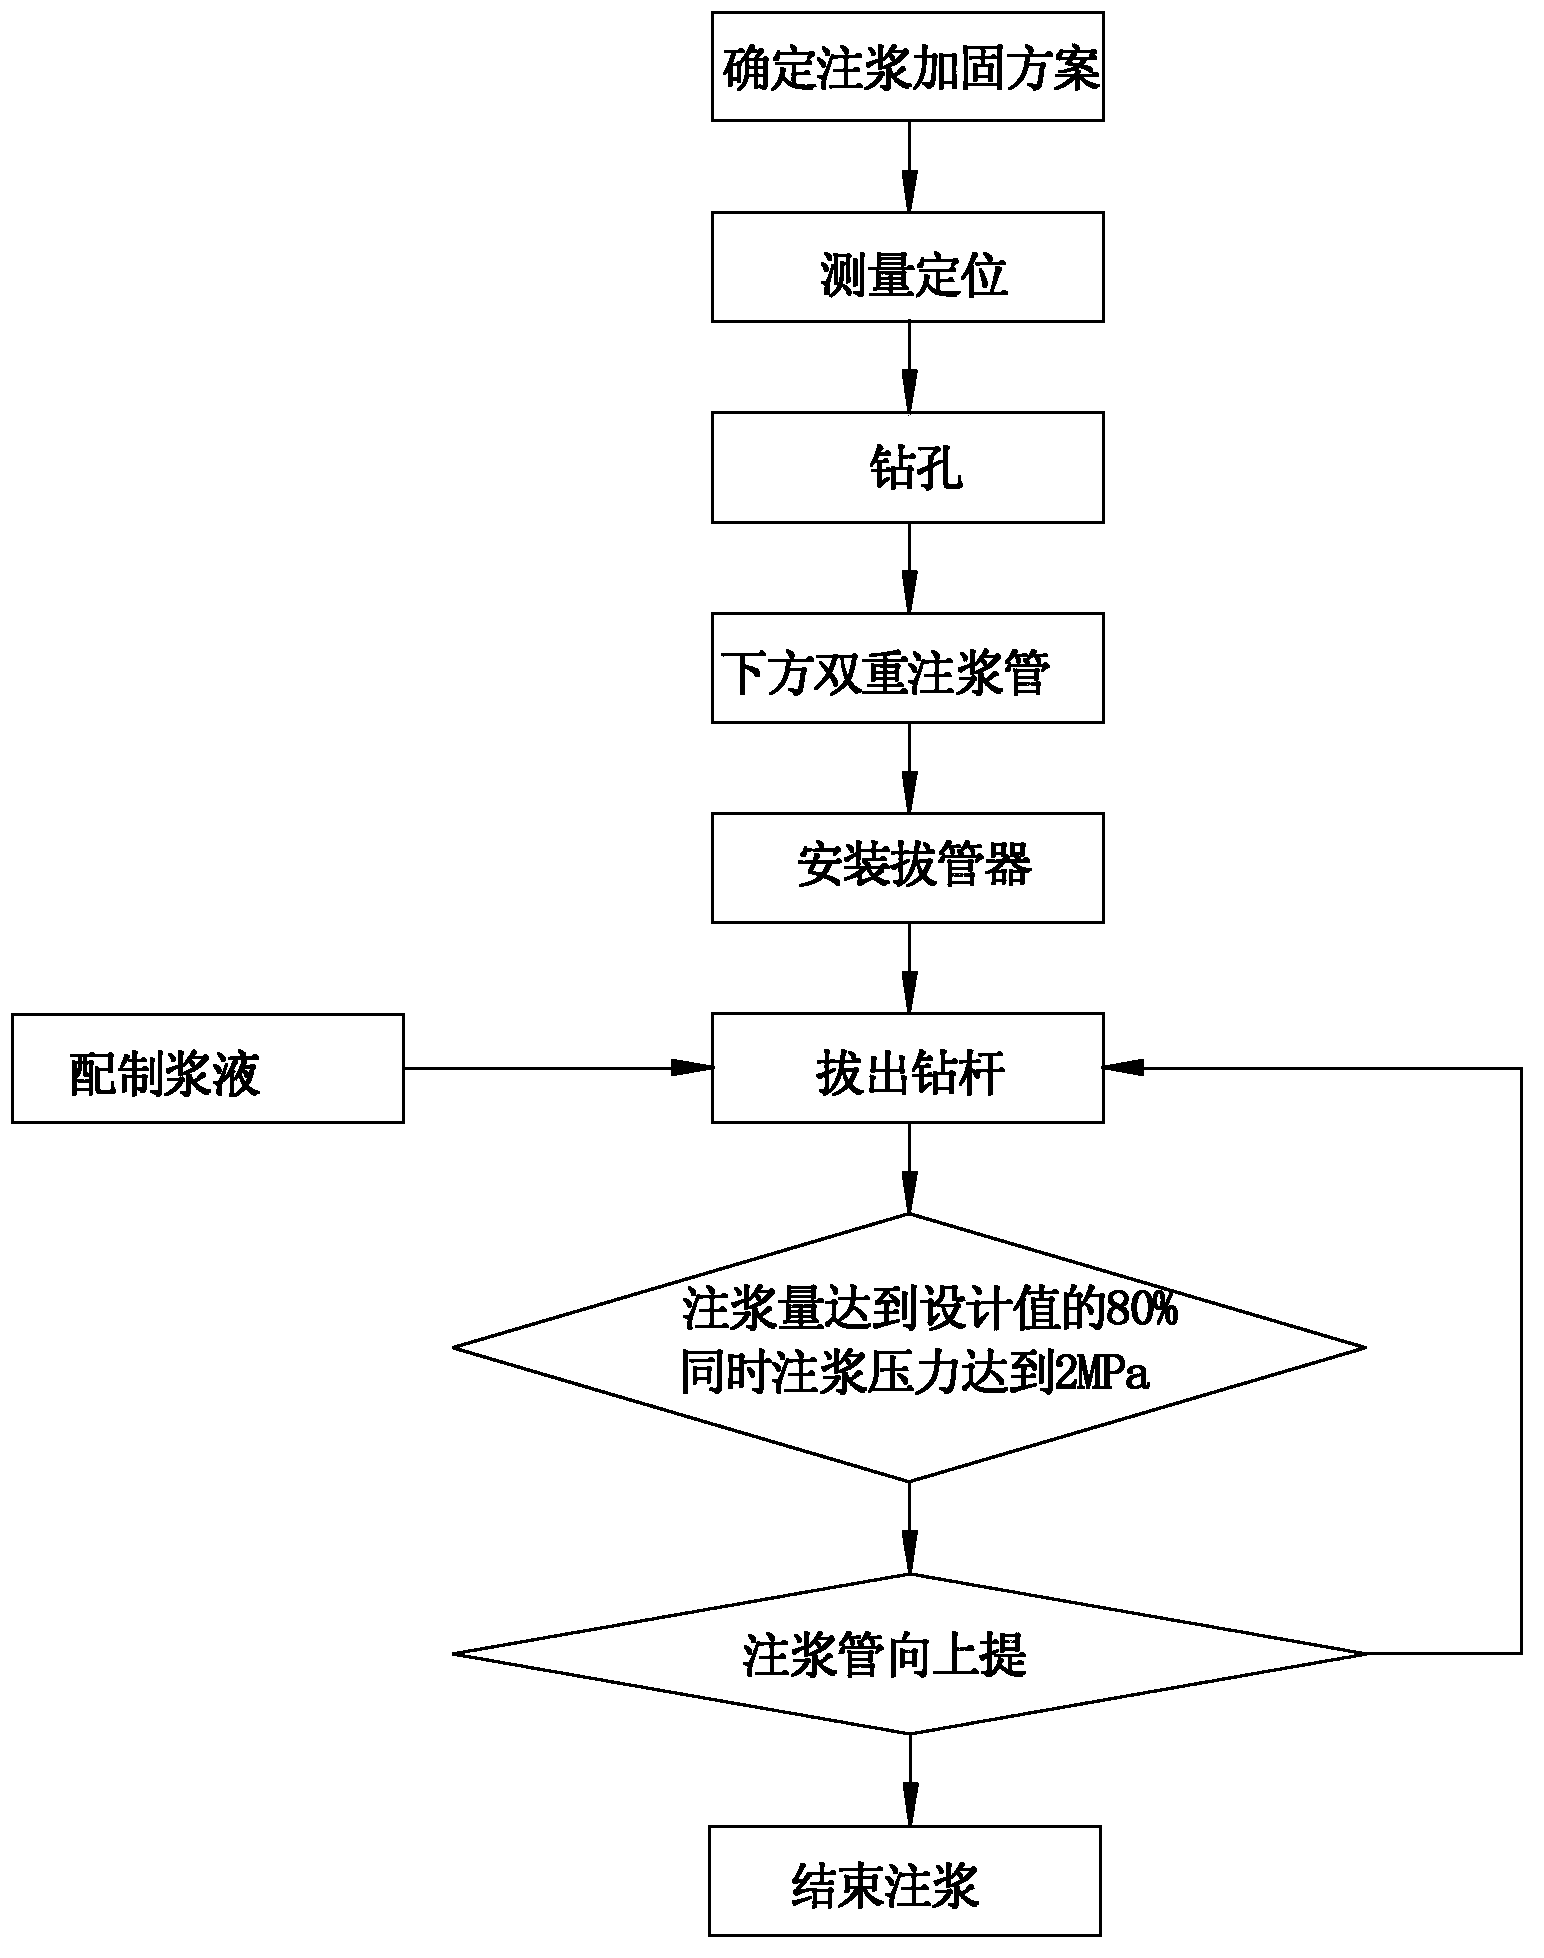 Sublevel retreating type two-fluid composite grouting construction method for deep foundation pit of sandy gravel stratum